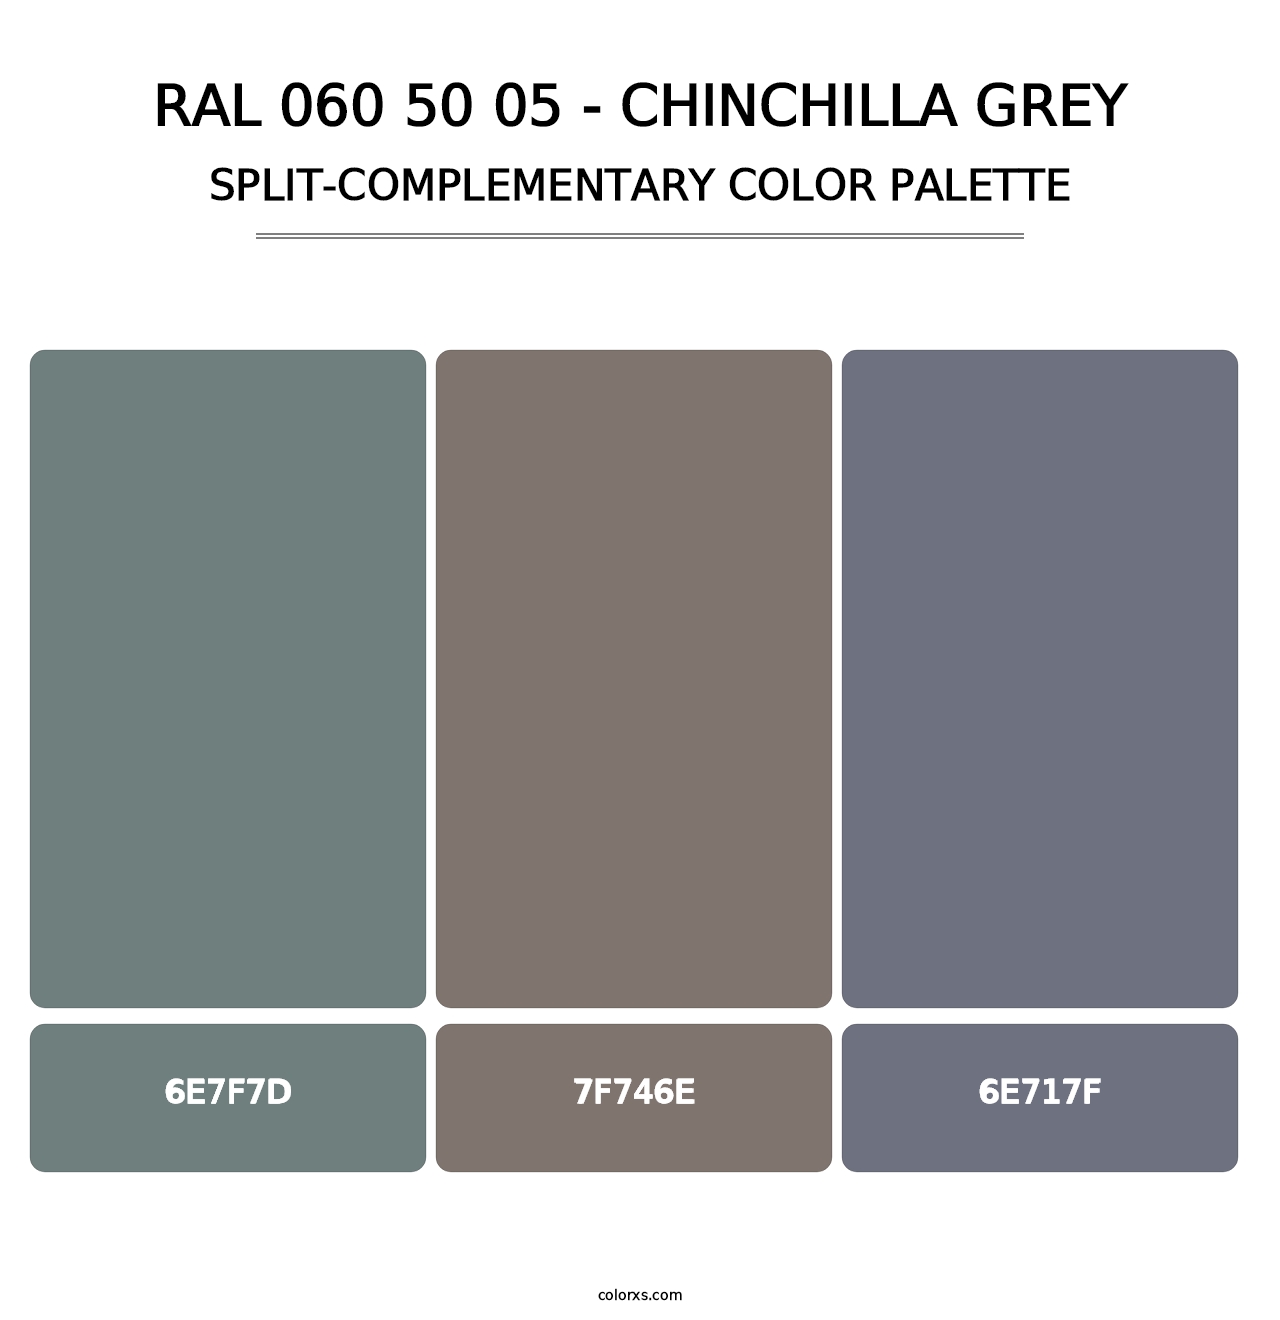 RAL 060 50 05 - Chinchilla Grey - Split-Complementary Color Palette